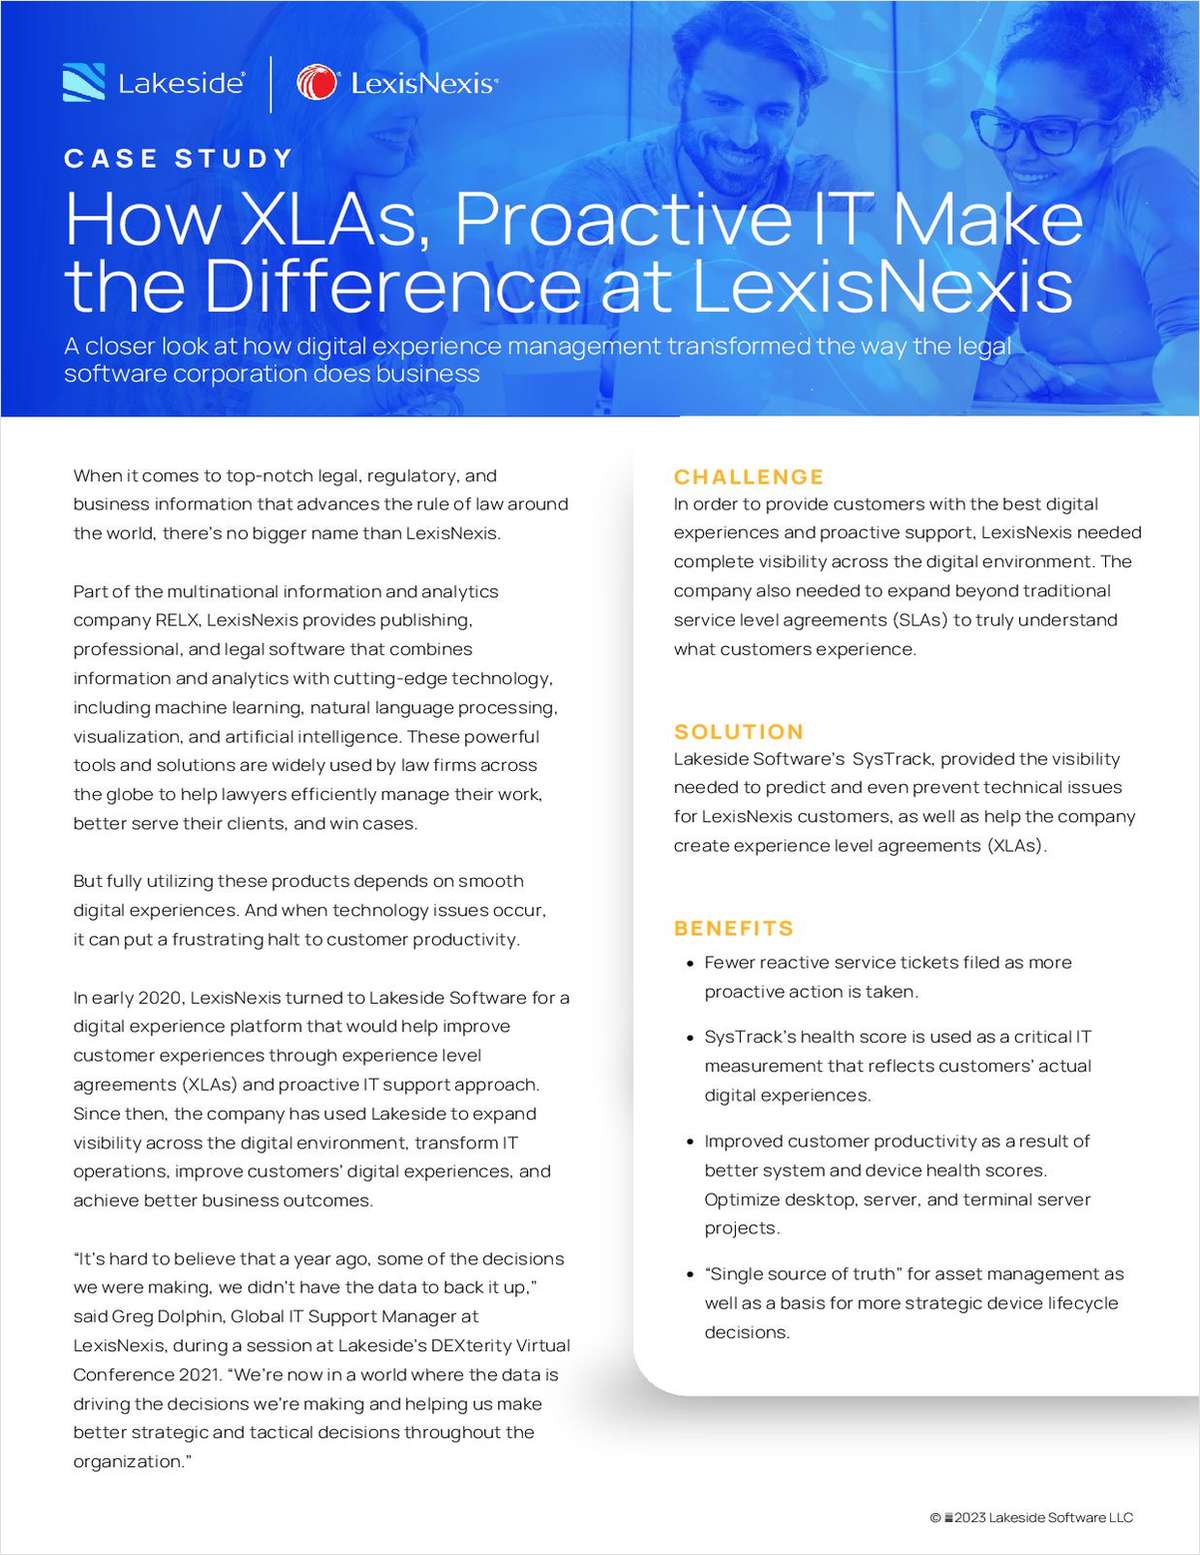 How XLAs, Proactive IT Make the Difference at LexisNexis